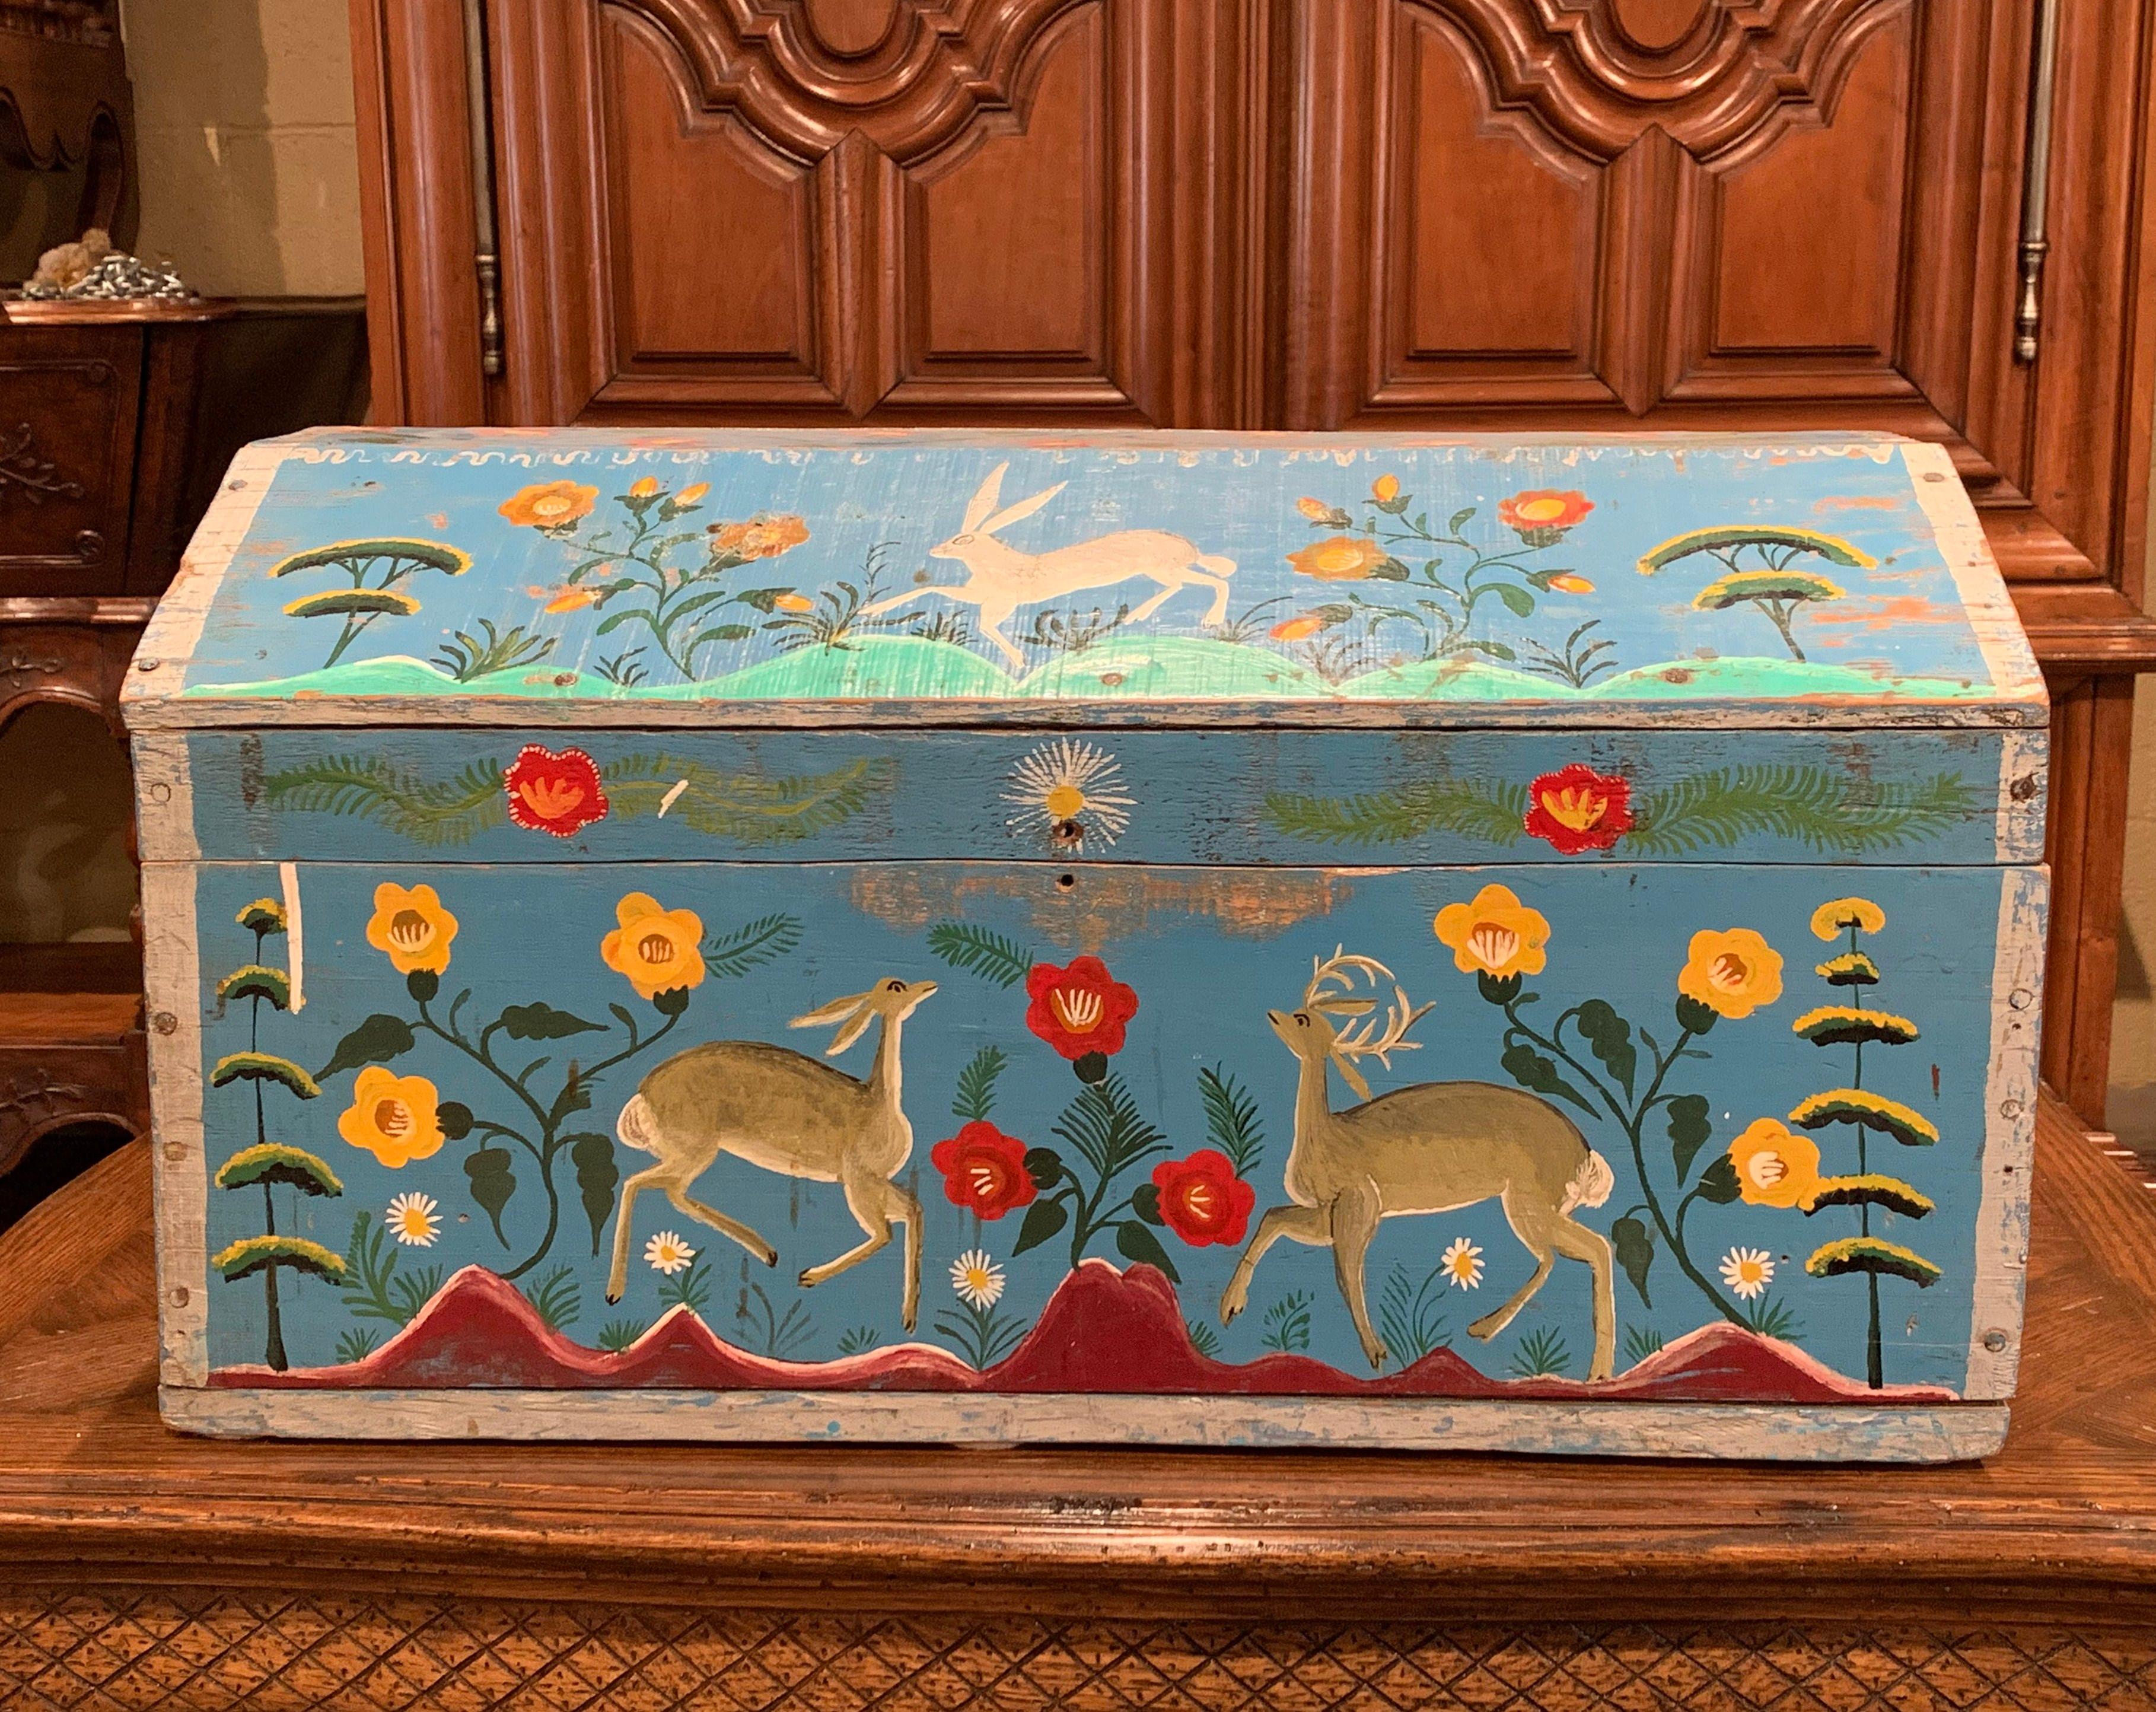 This beautifully executed antique wedding trunk was crafted in northern France, circa 1880. The colorful bombe box features hand painted decorations in a vibrant blue, green and red palette. The traditional trunk is decorated with rabbits and deer